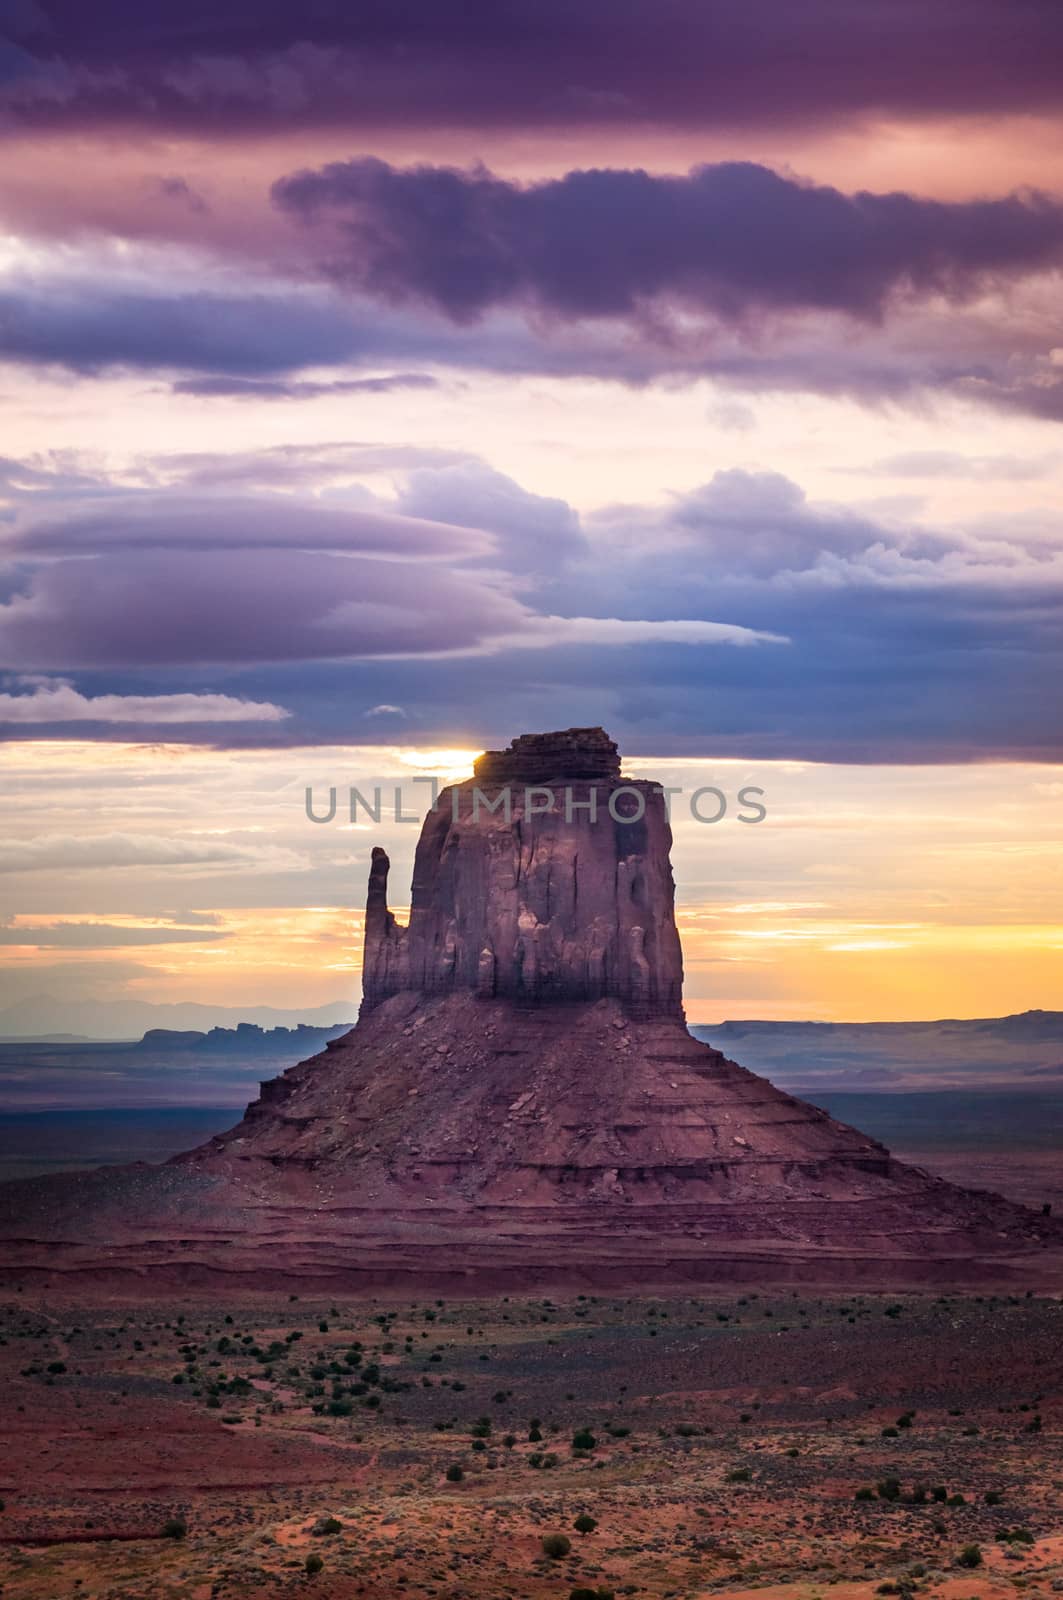 Beautiful colorful sunrise at Monument valley by martinm303